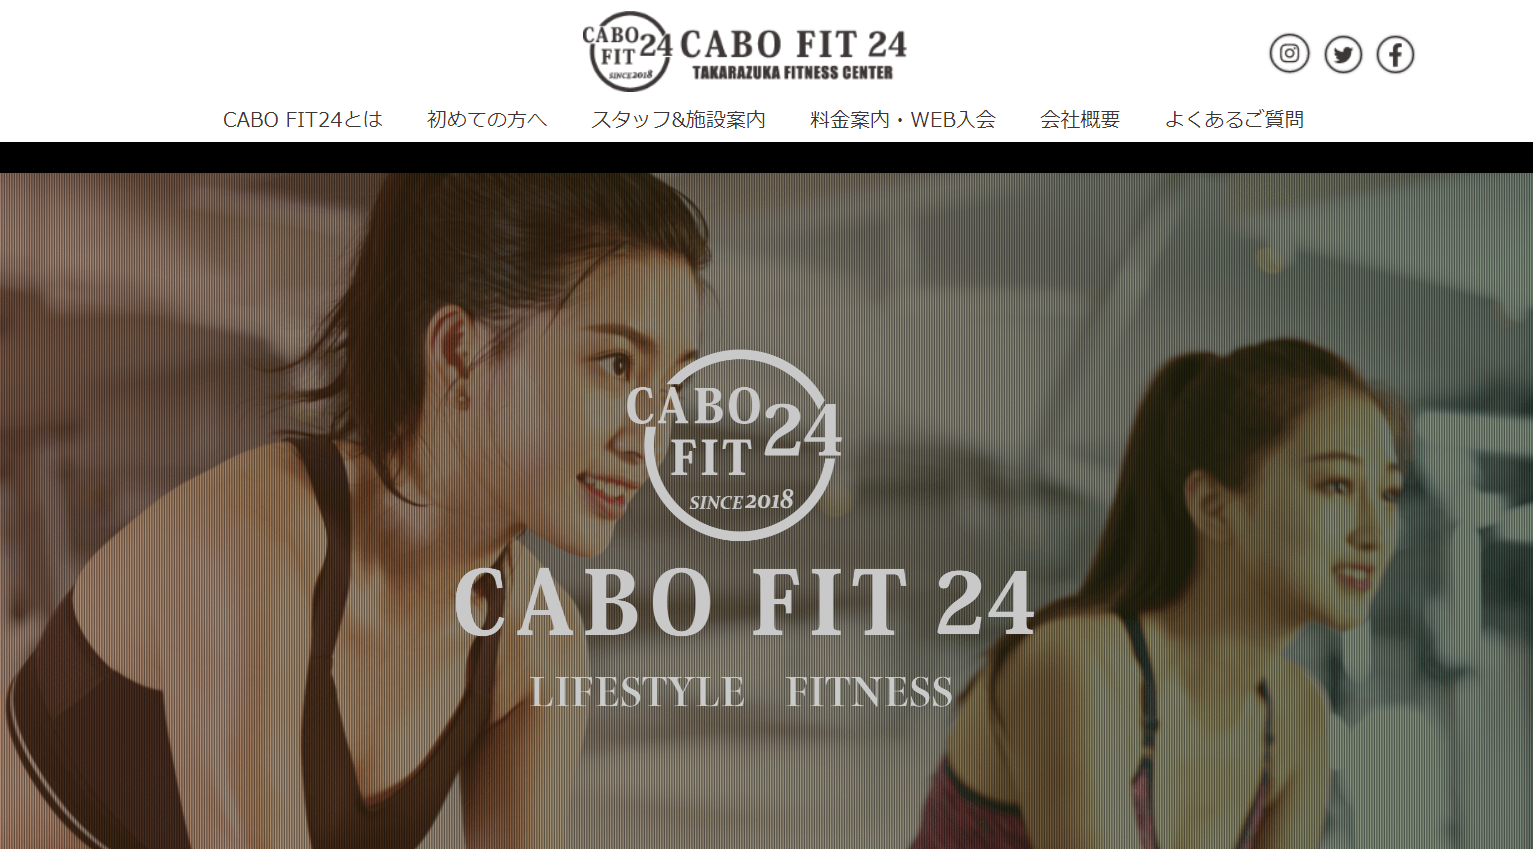 CABO FIT(カボフィット)24宝塚